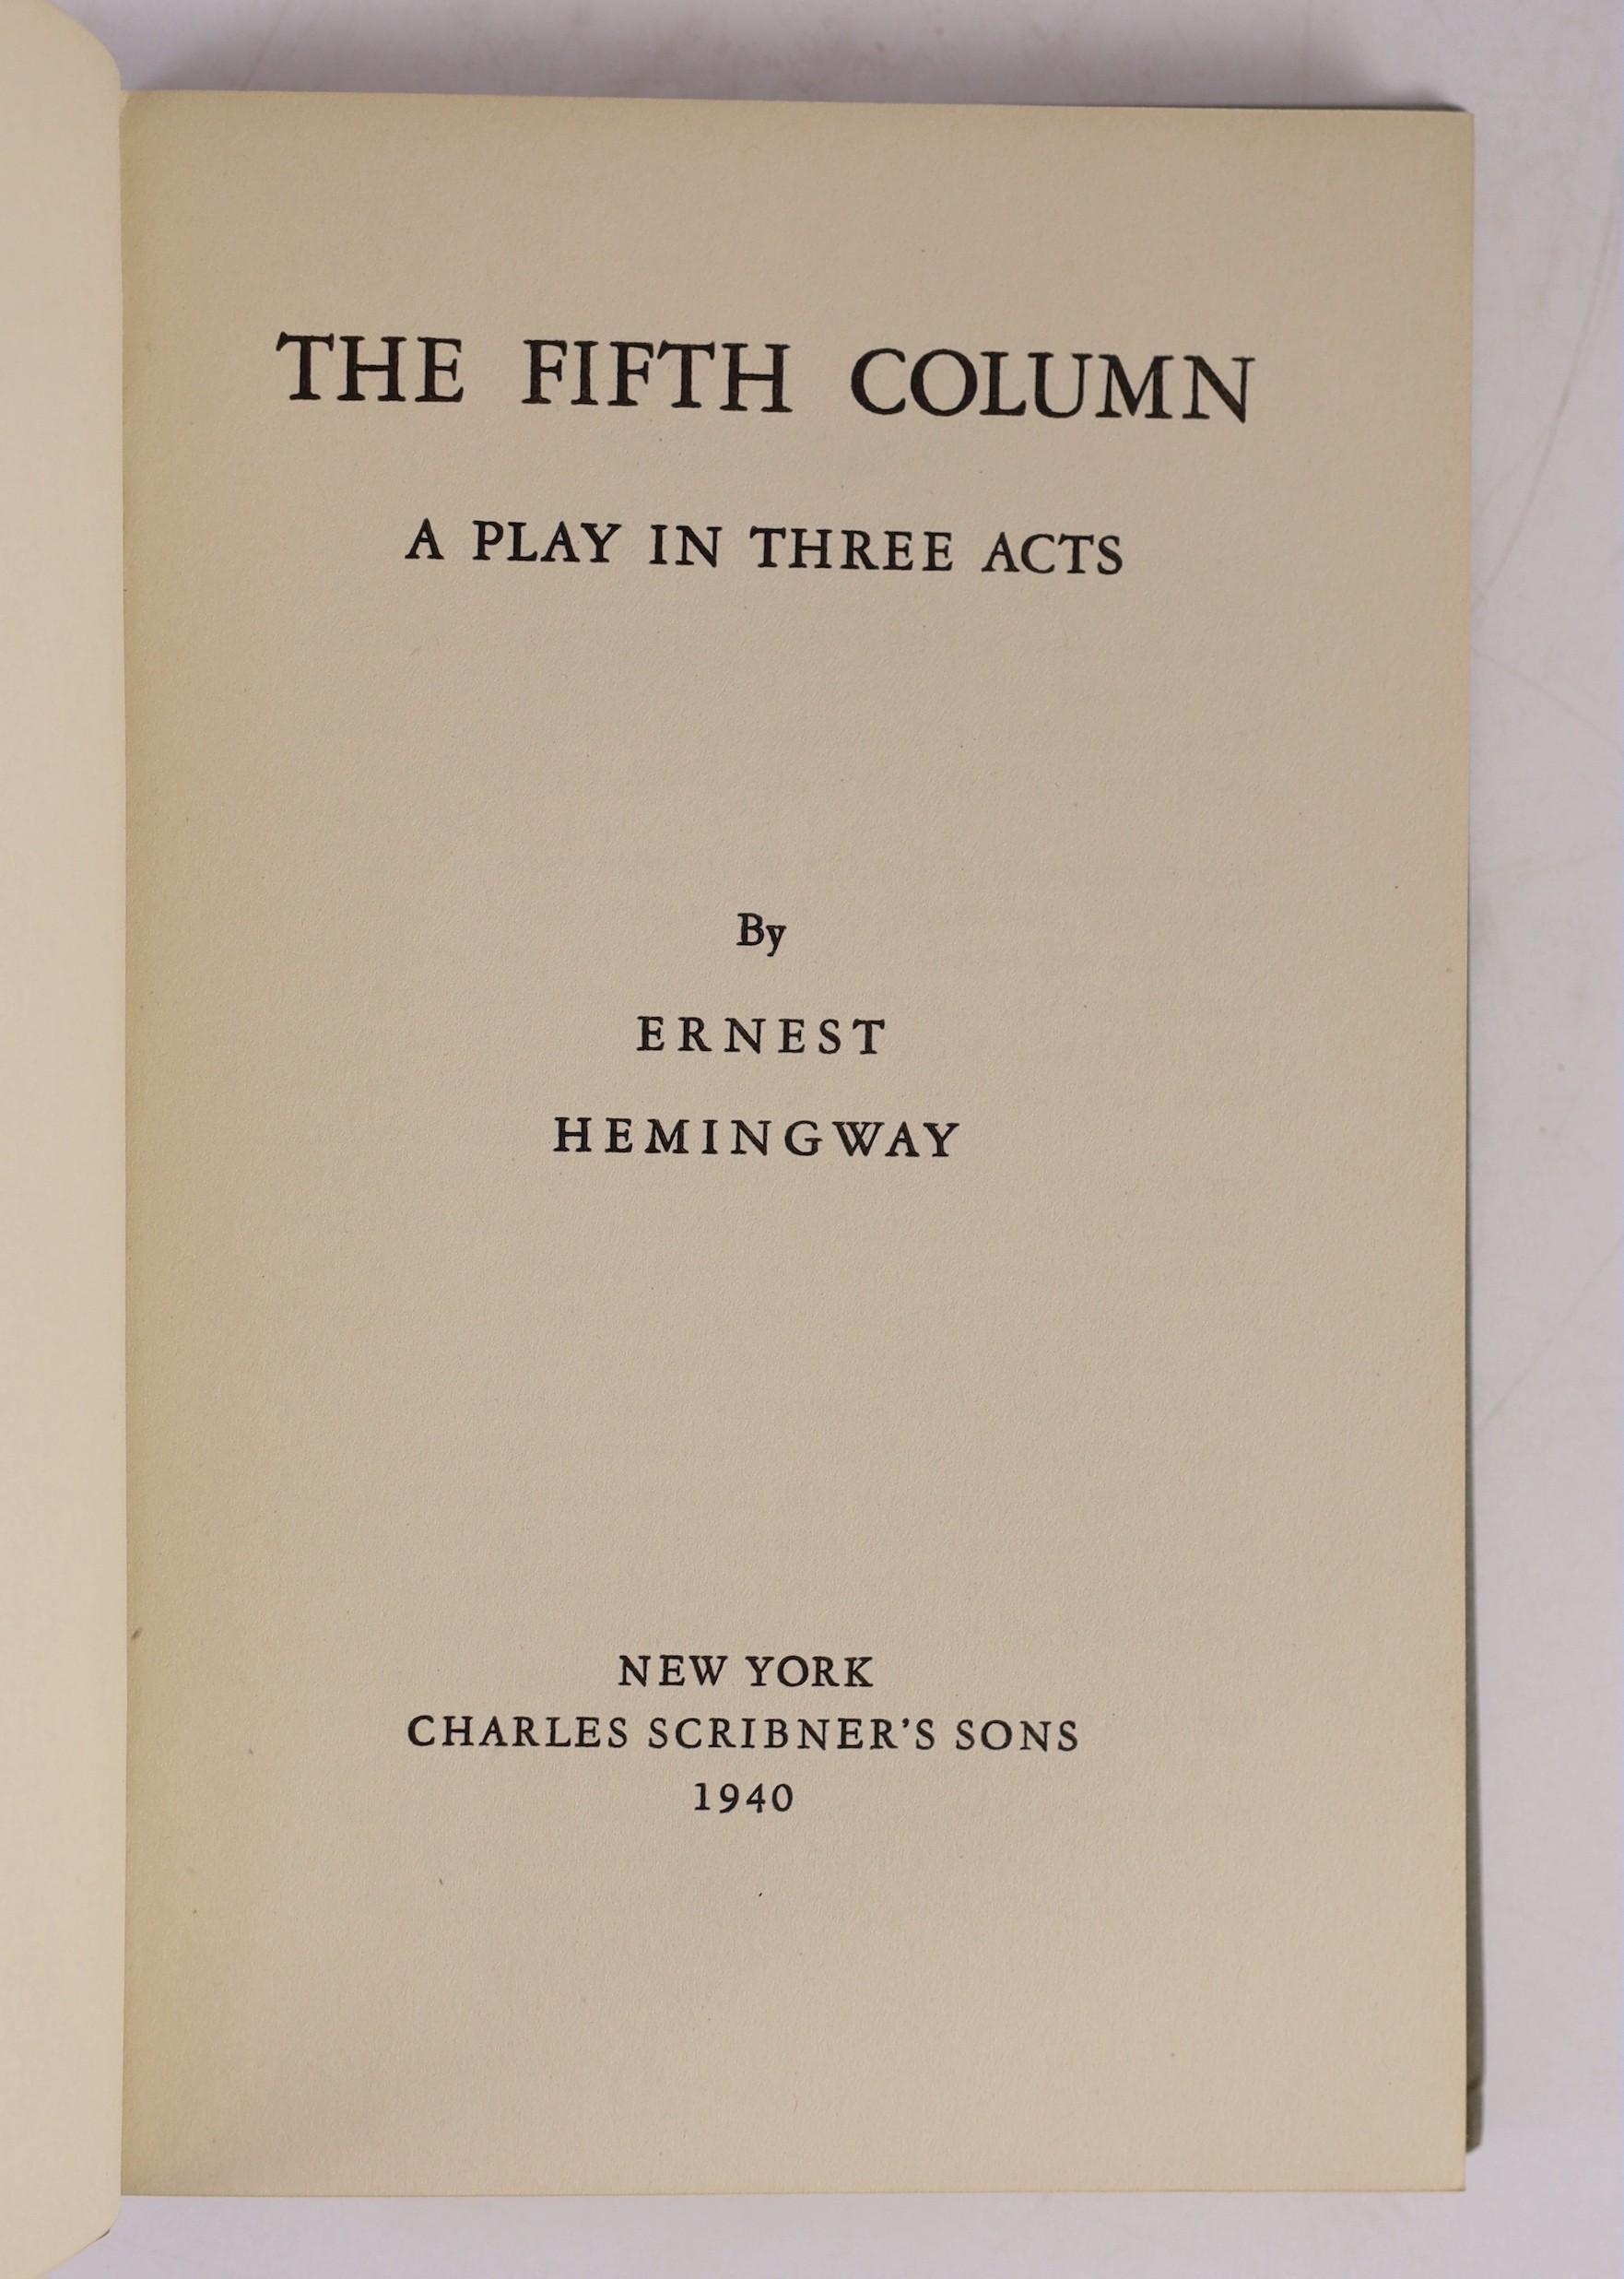 Hemingway, Ernest - The Fifth Column a Play in Three Acts, 1st edition, 1st printing, 8vo, cloth, Charles Scribner’s Sons, New York, 1940